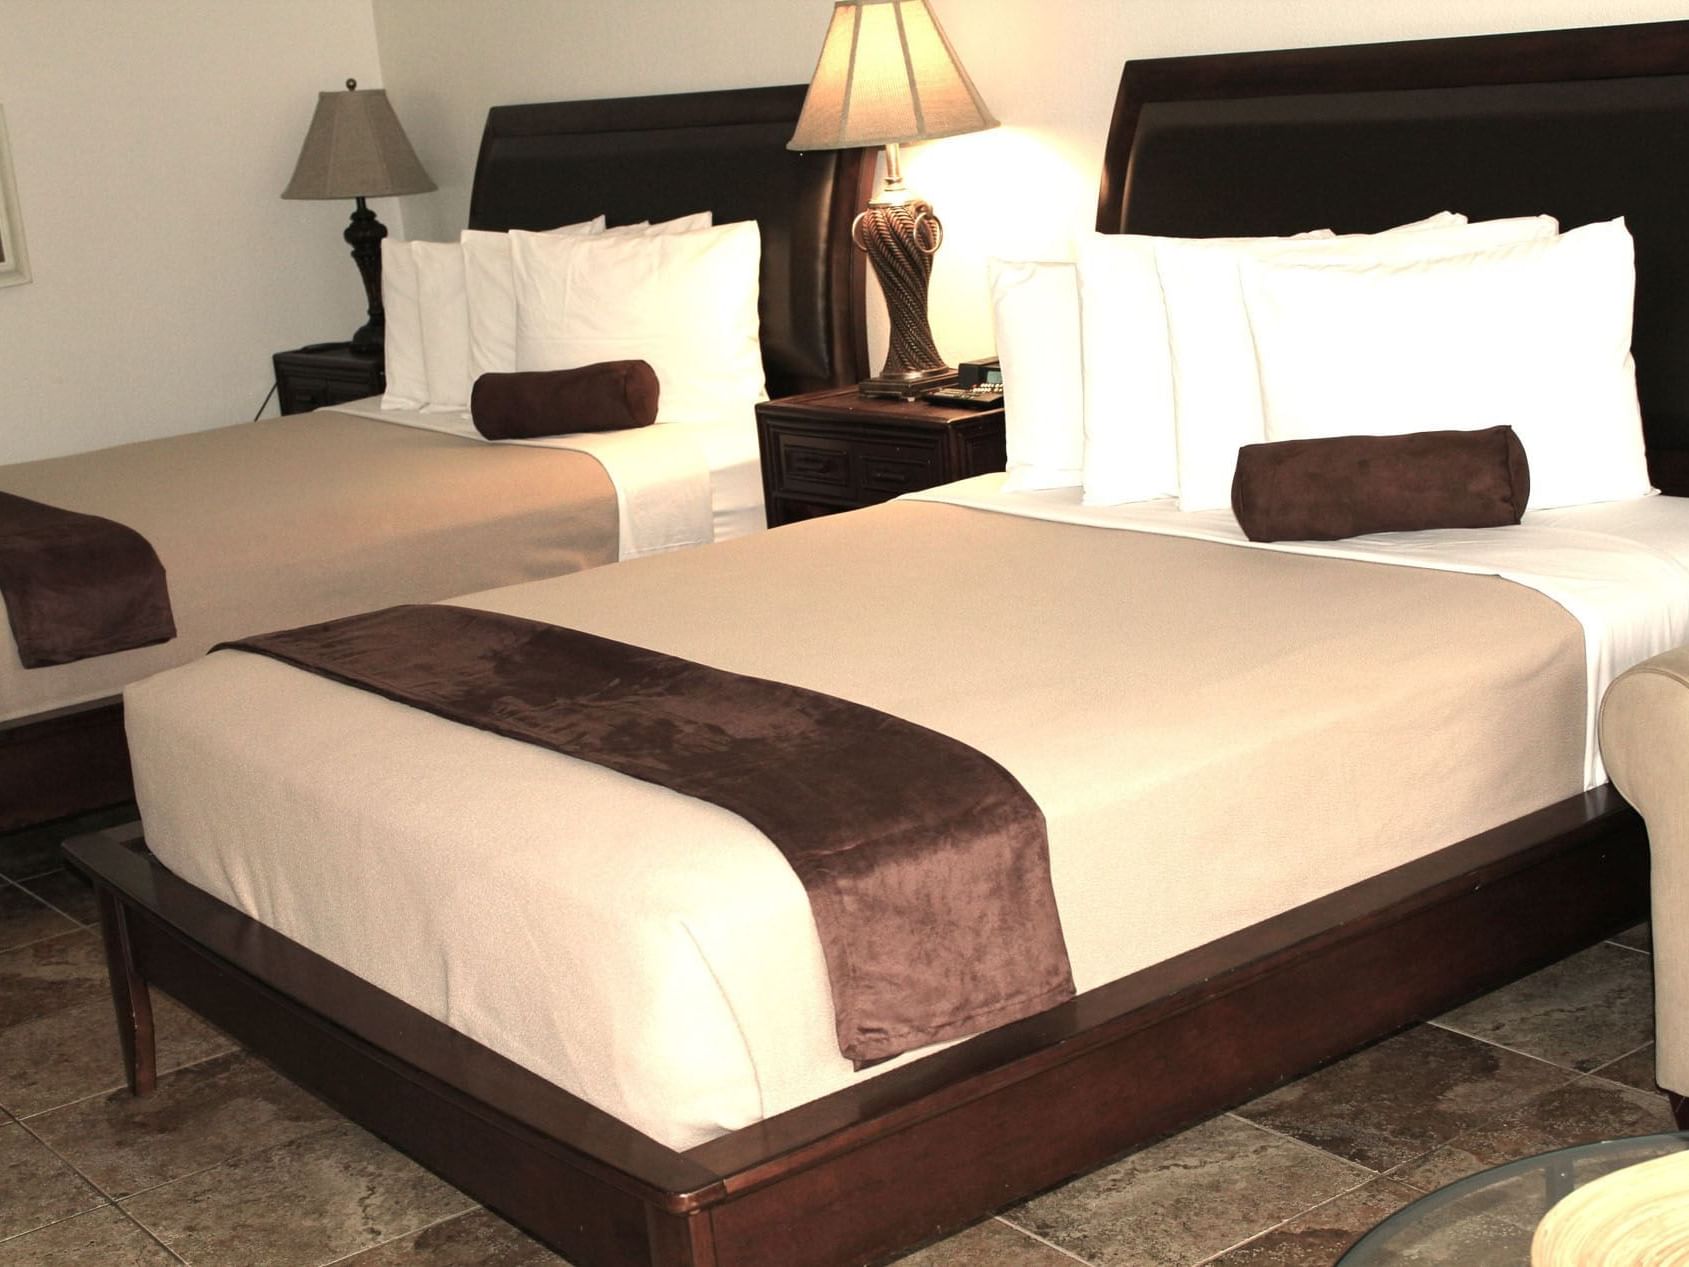 Two queen beds with nightstands in the Royal Palms Suite at Ocean Lodge Boca Raton